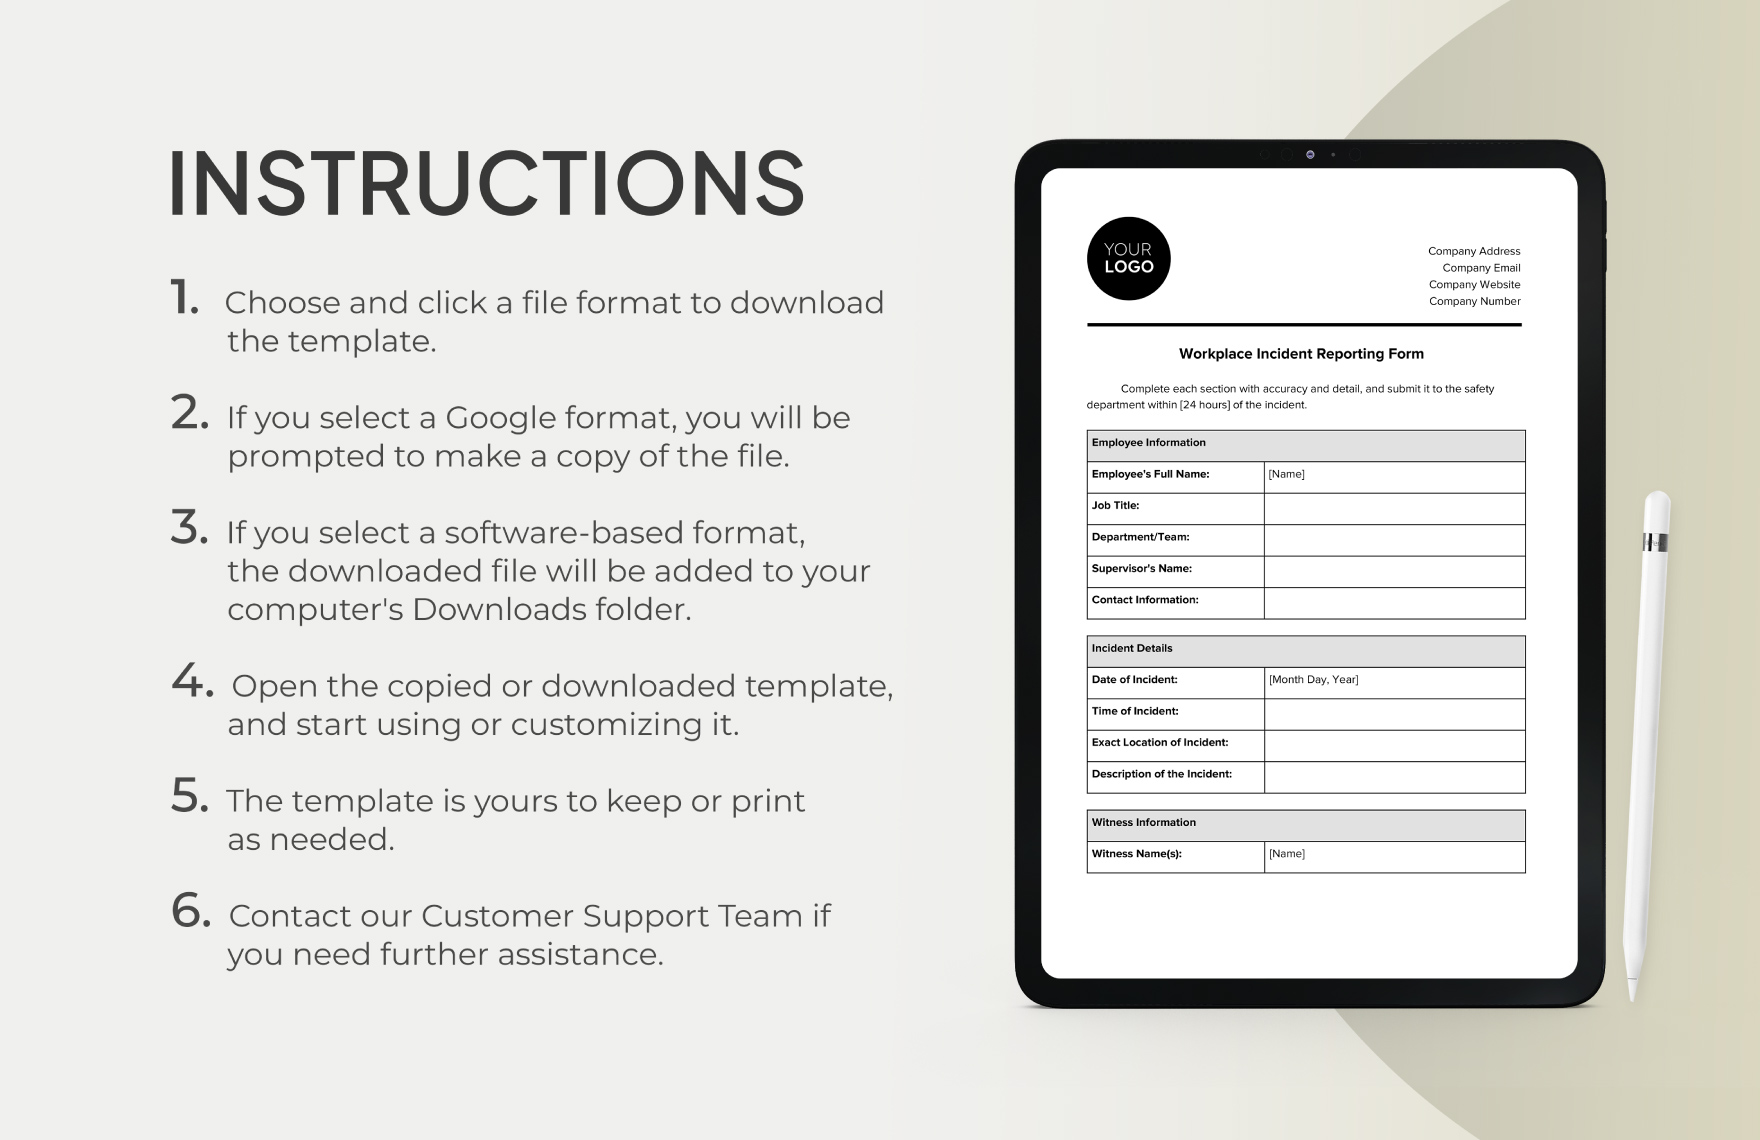 Workplace Incident Reporting Form Template